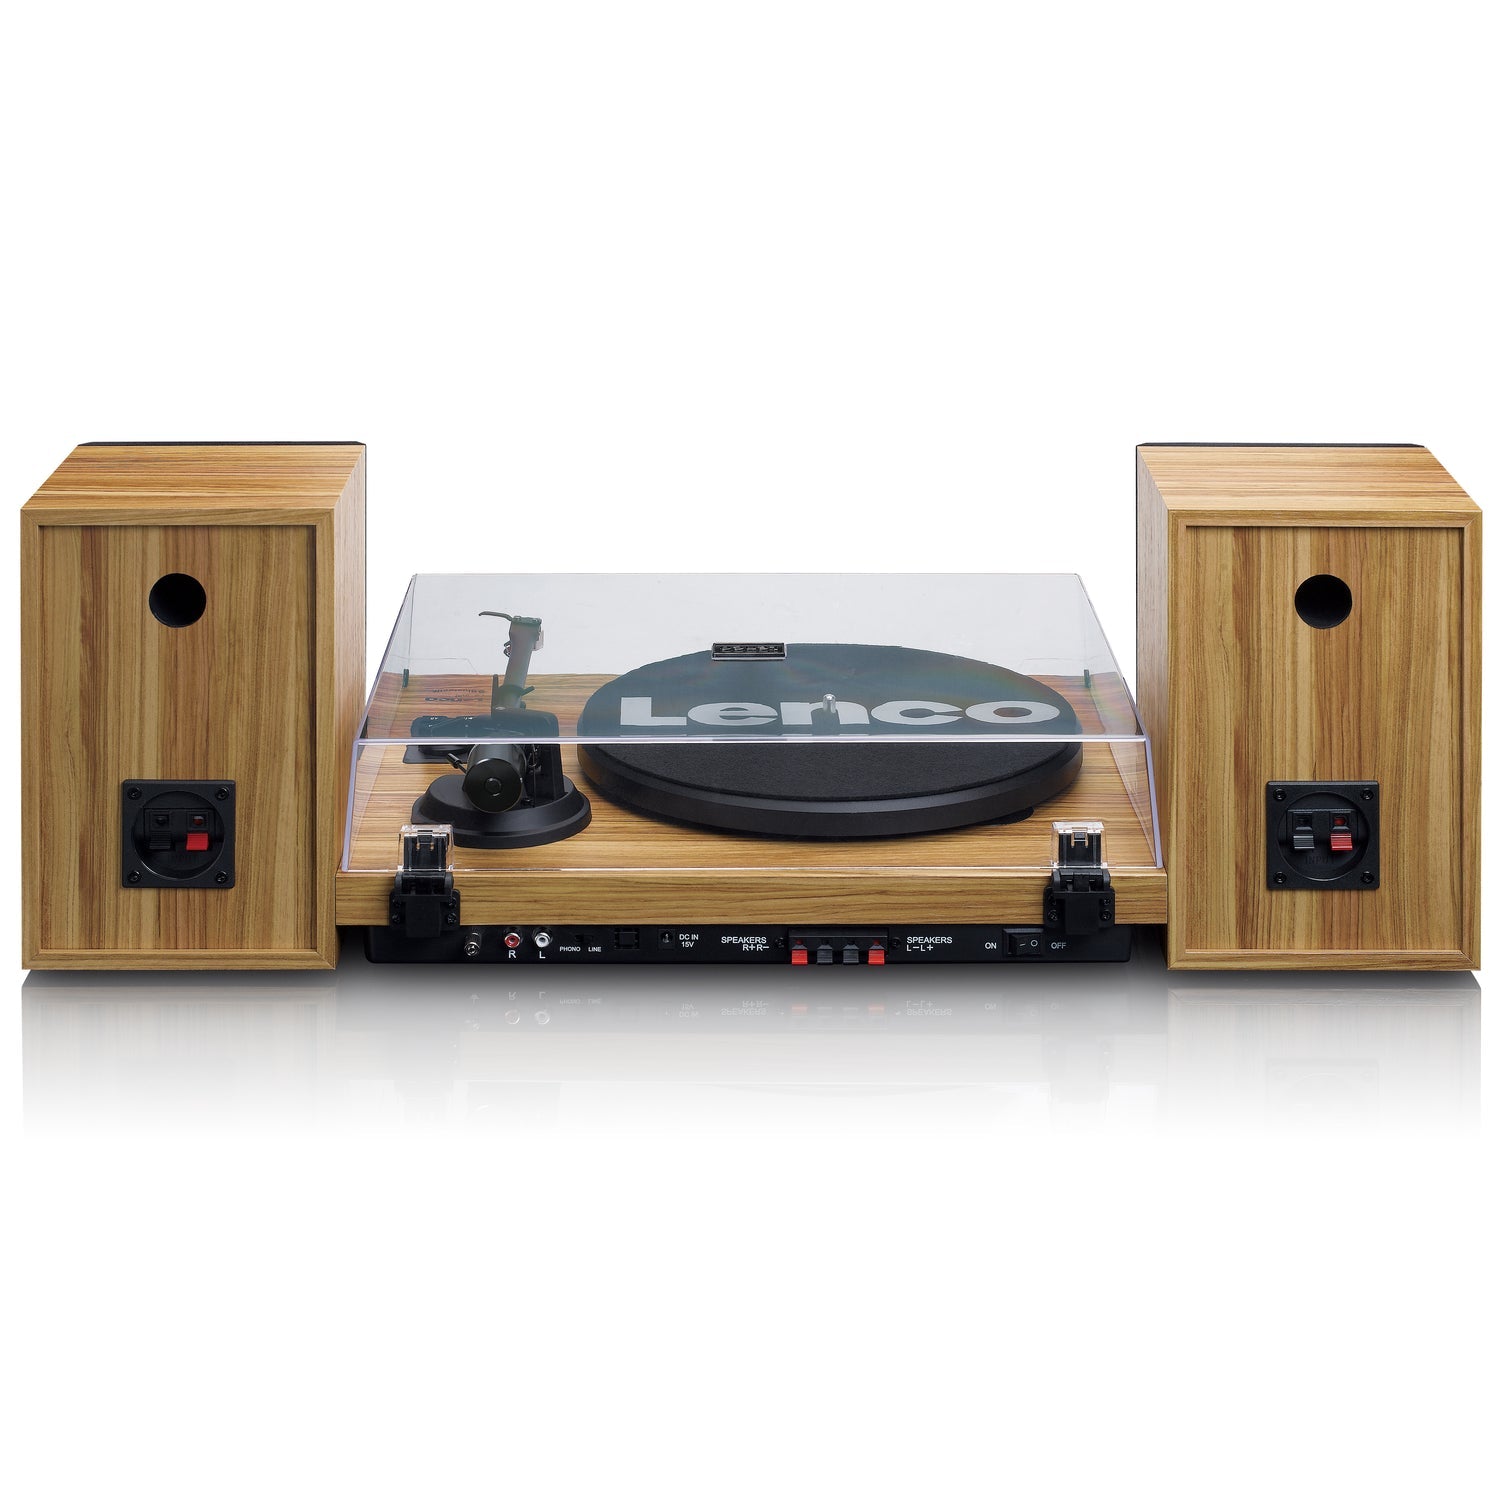 Lenco LS-500OK Record player with Built-in amplifier and Bluetooth plus 2 external speakers - Wood